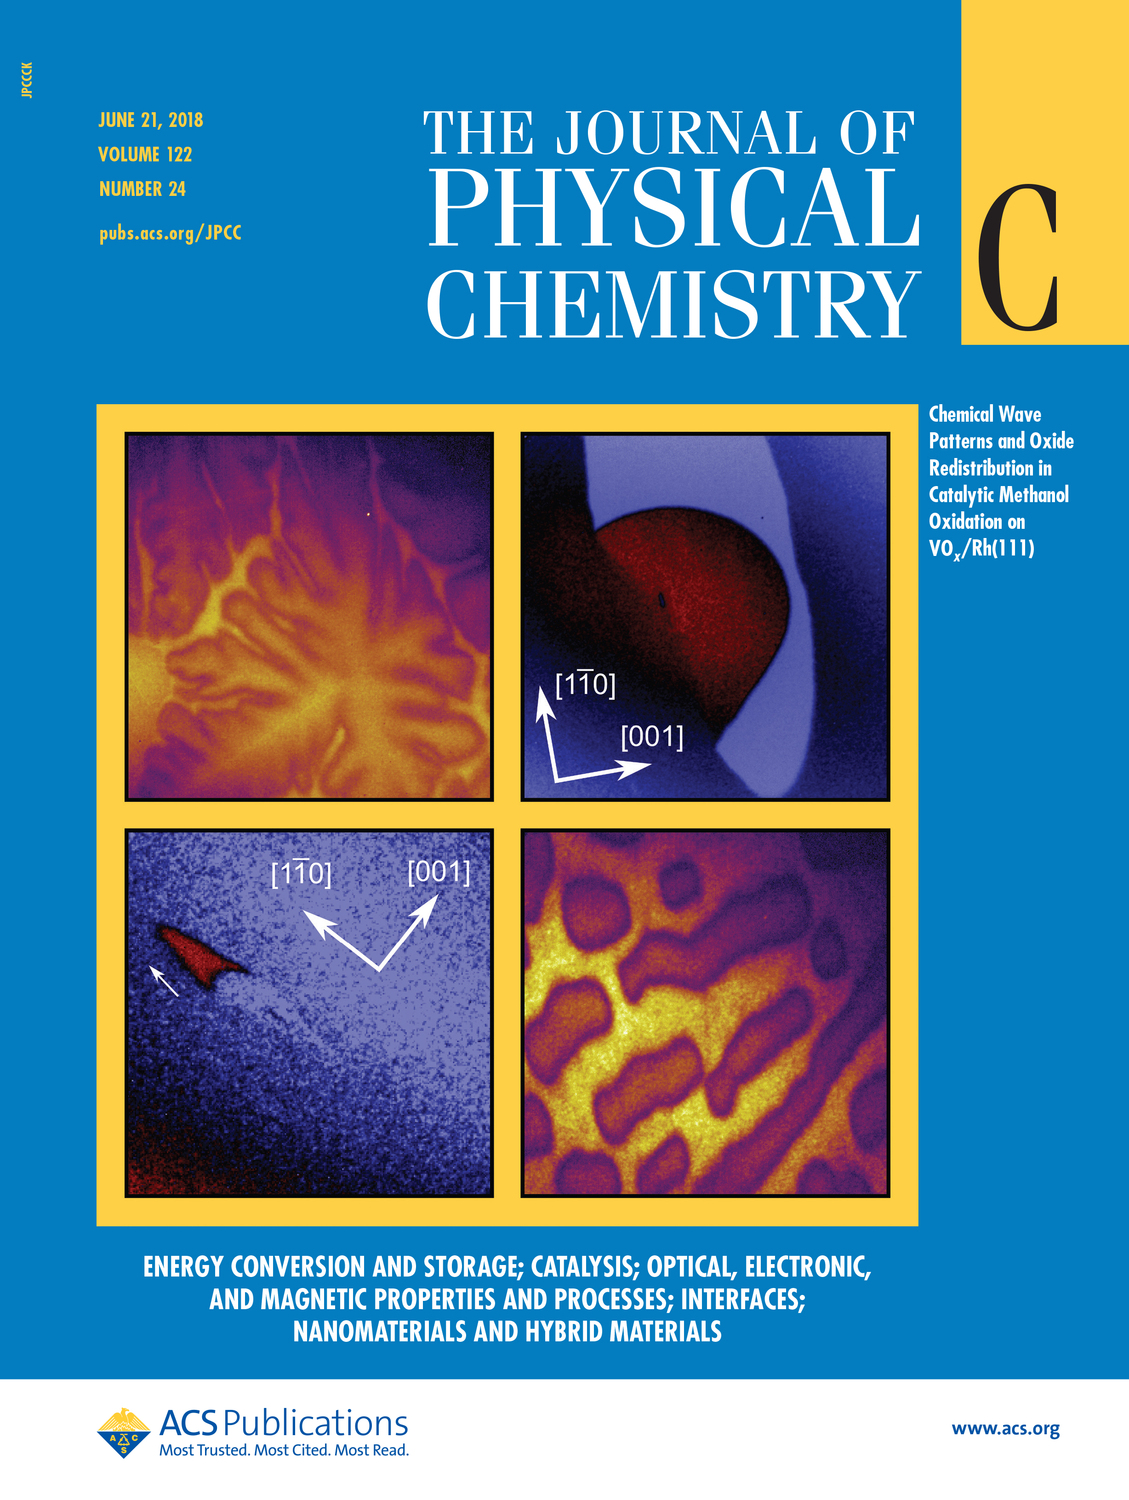 Coverpage of The Journal of Physical Chemistry C Vol.122 Number 24 in June 21, 2018 